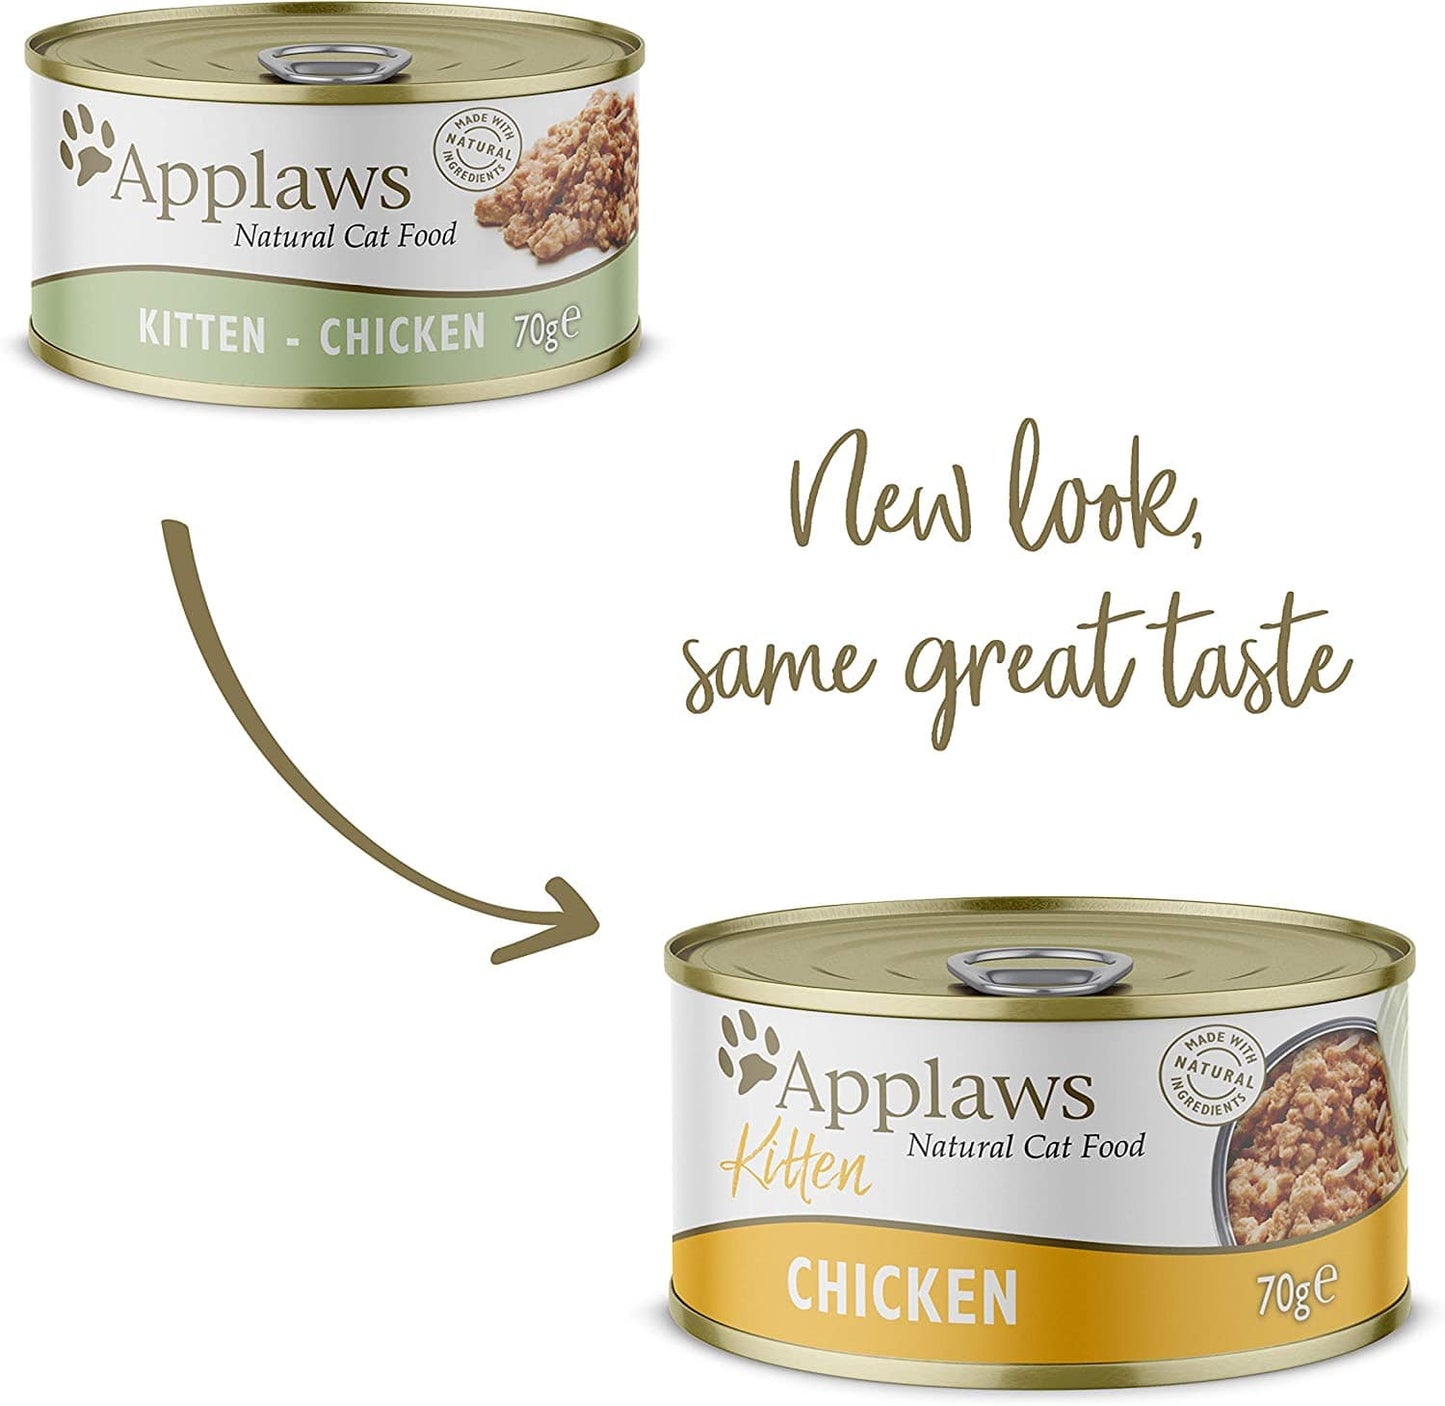 Applaws 100% Natural Wet Kitten Food, Chicken Breast Cat Food Tin in Jelly 70g